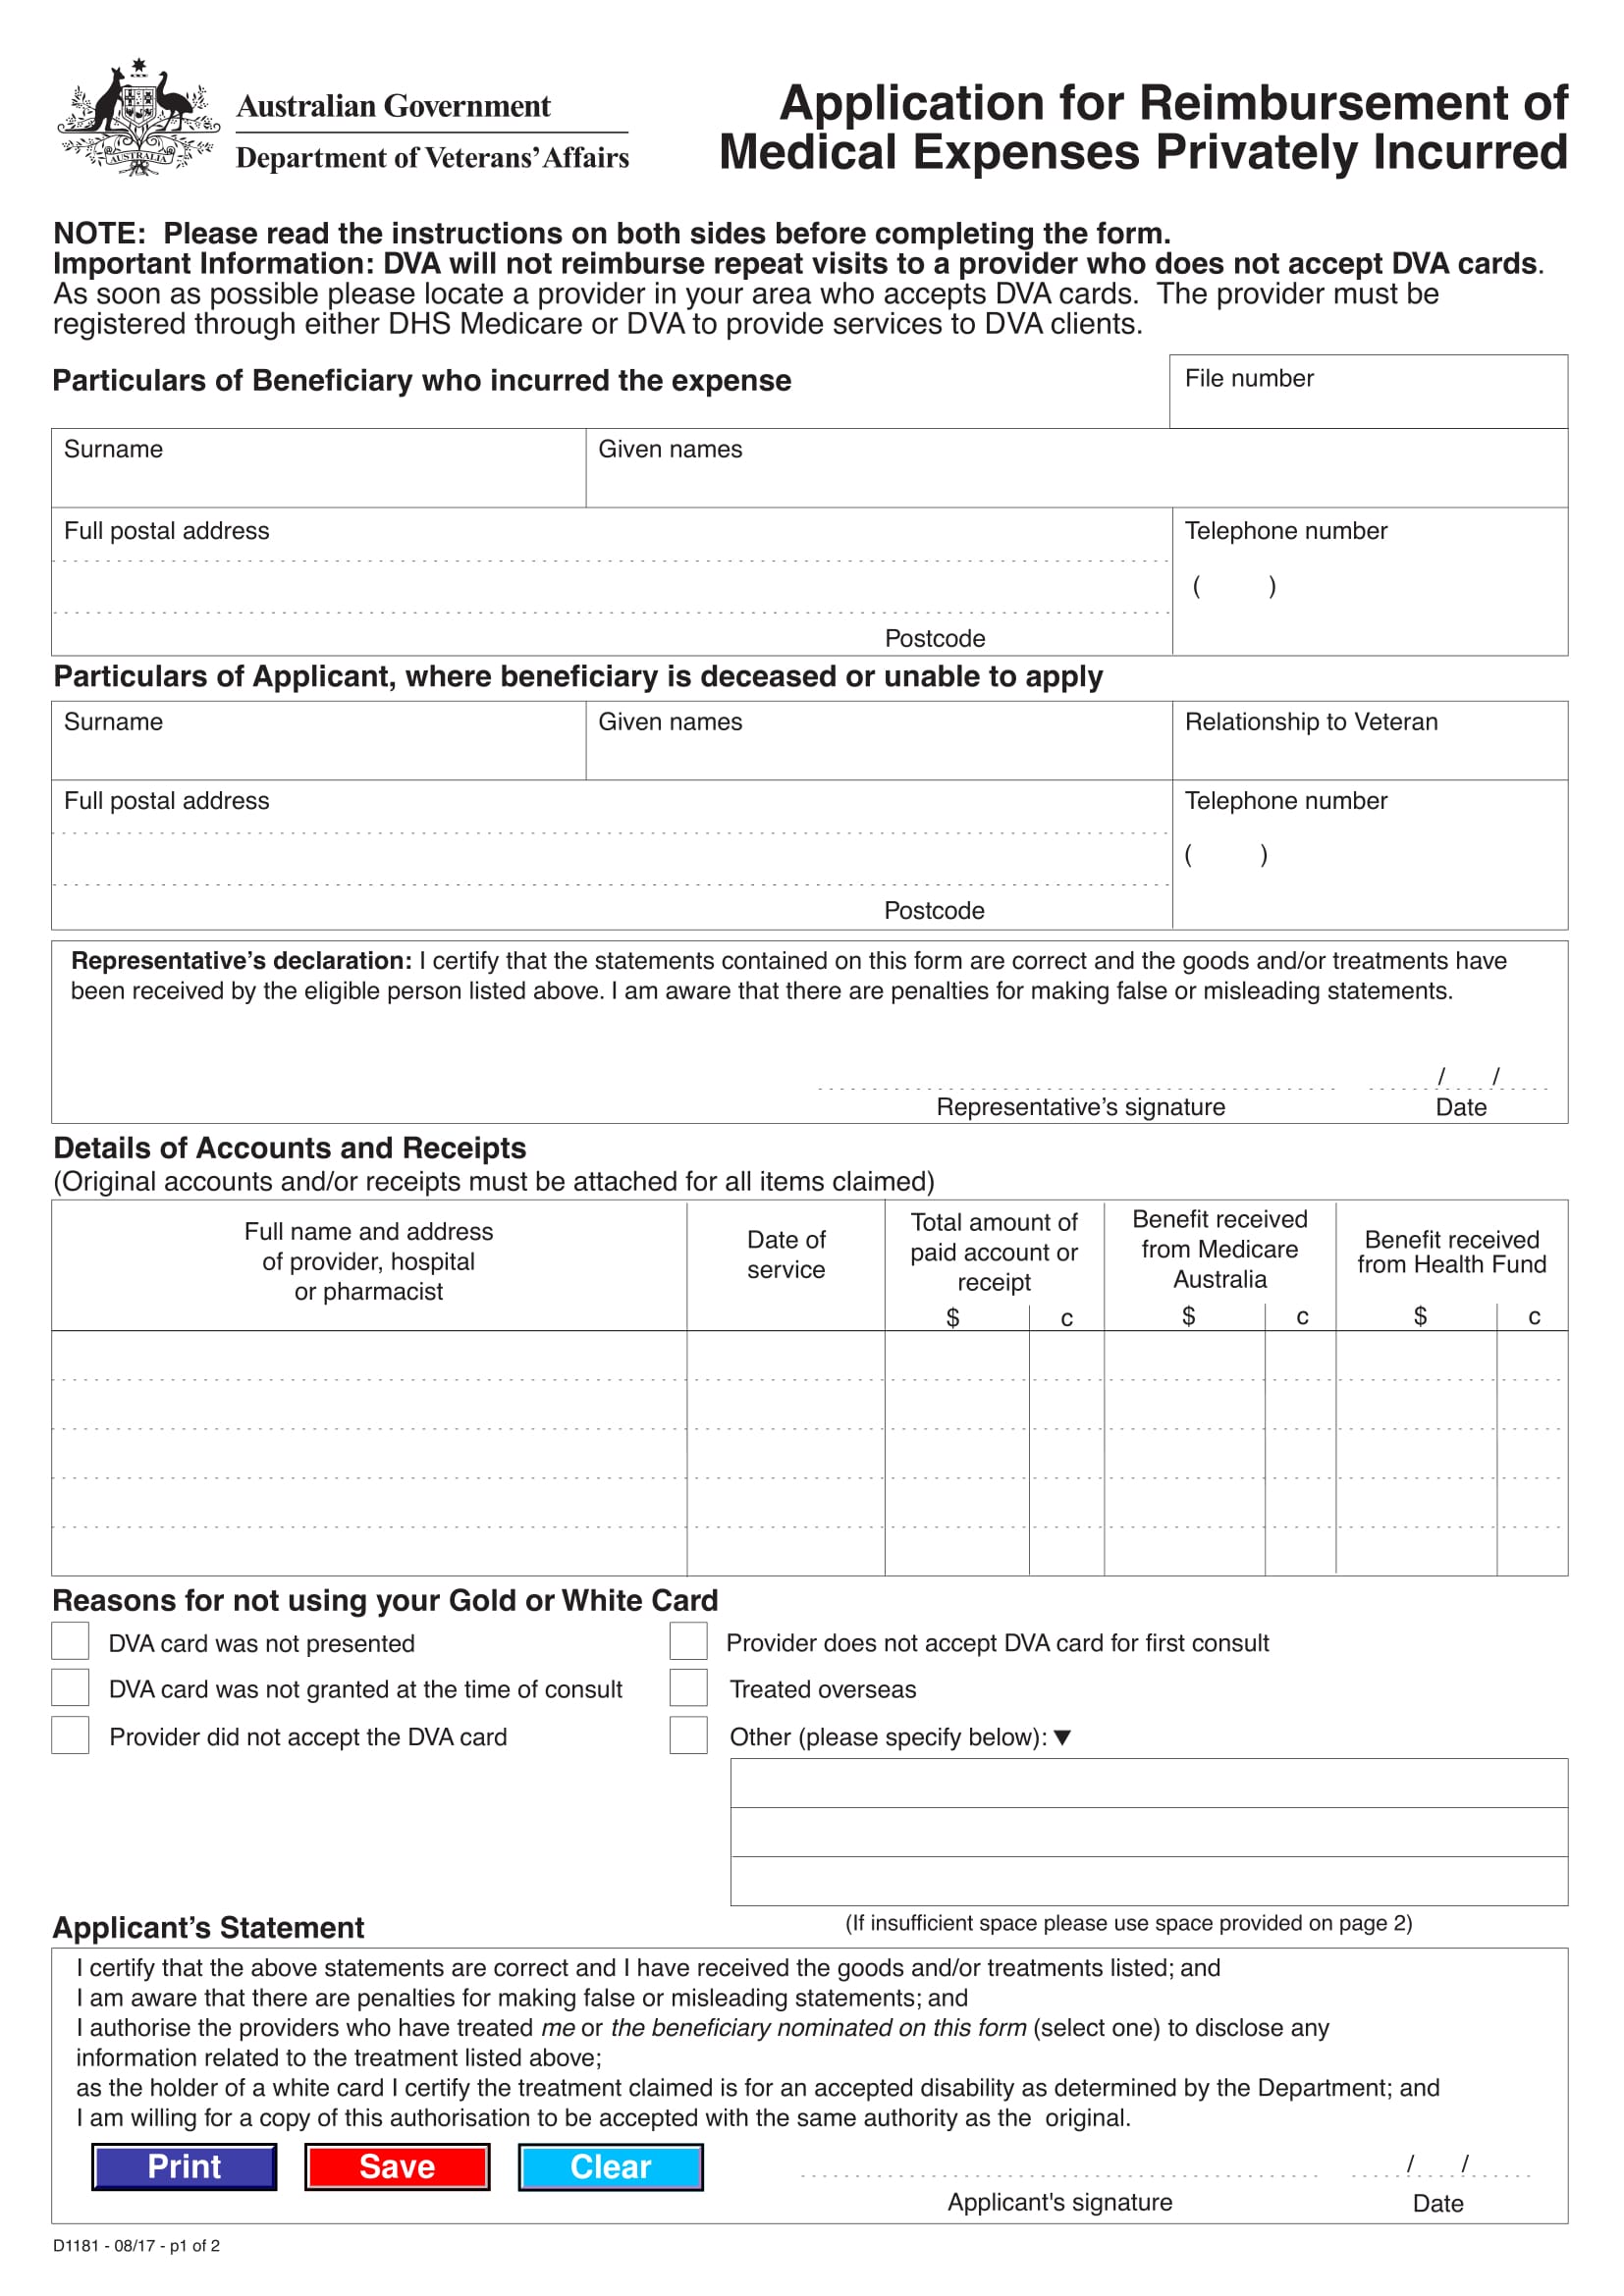 medical expenses privately incurred reimbursement application form 1